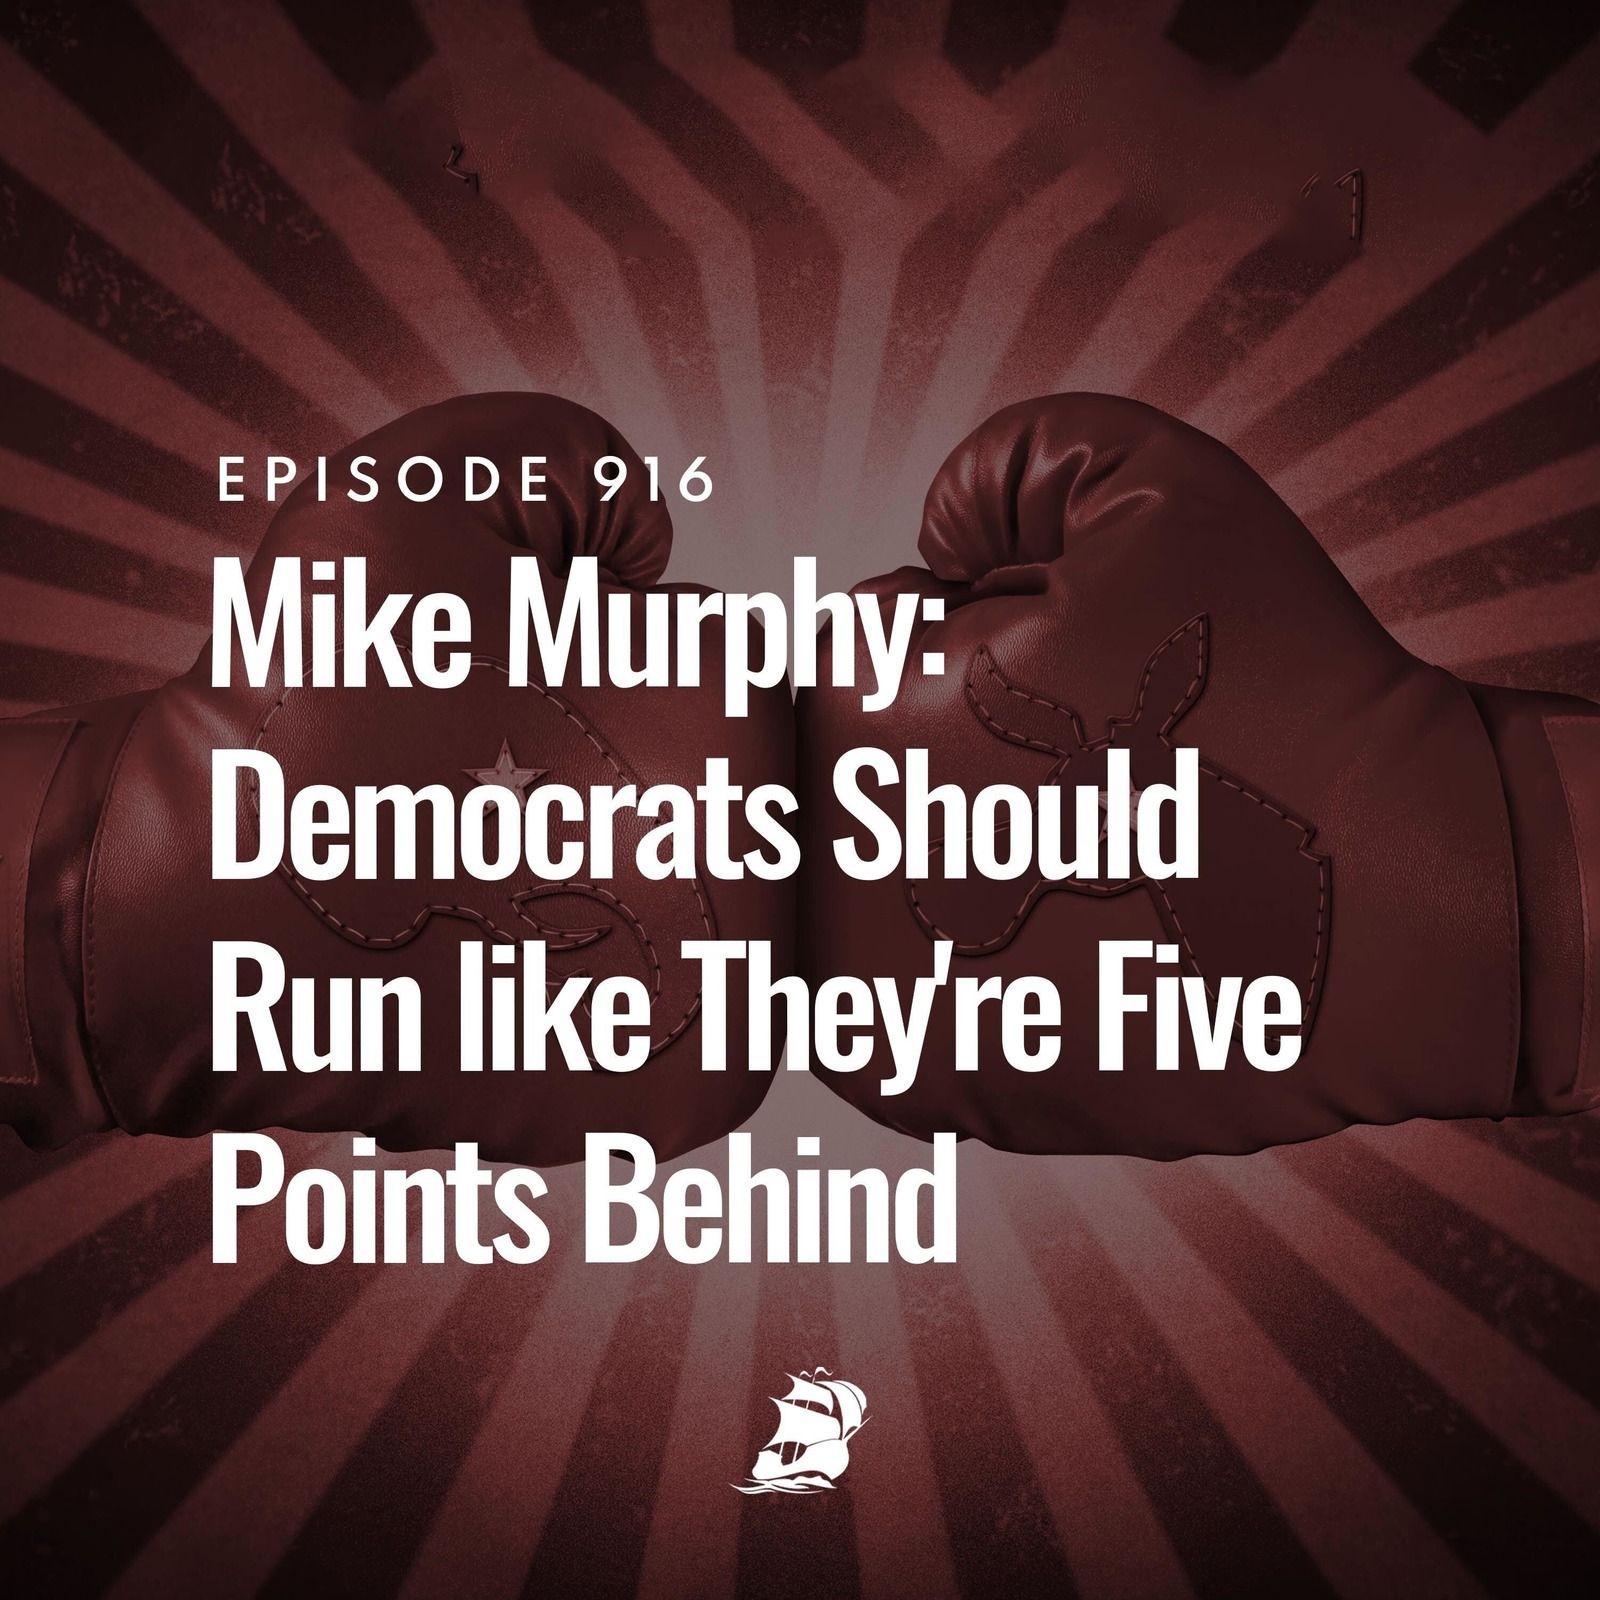 Mike Murphy: Democrats Should Run like They're Five Points Behind